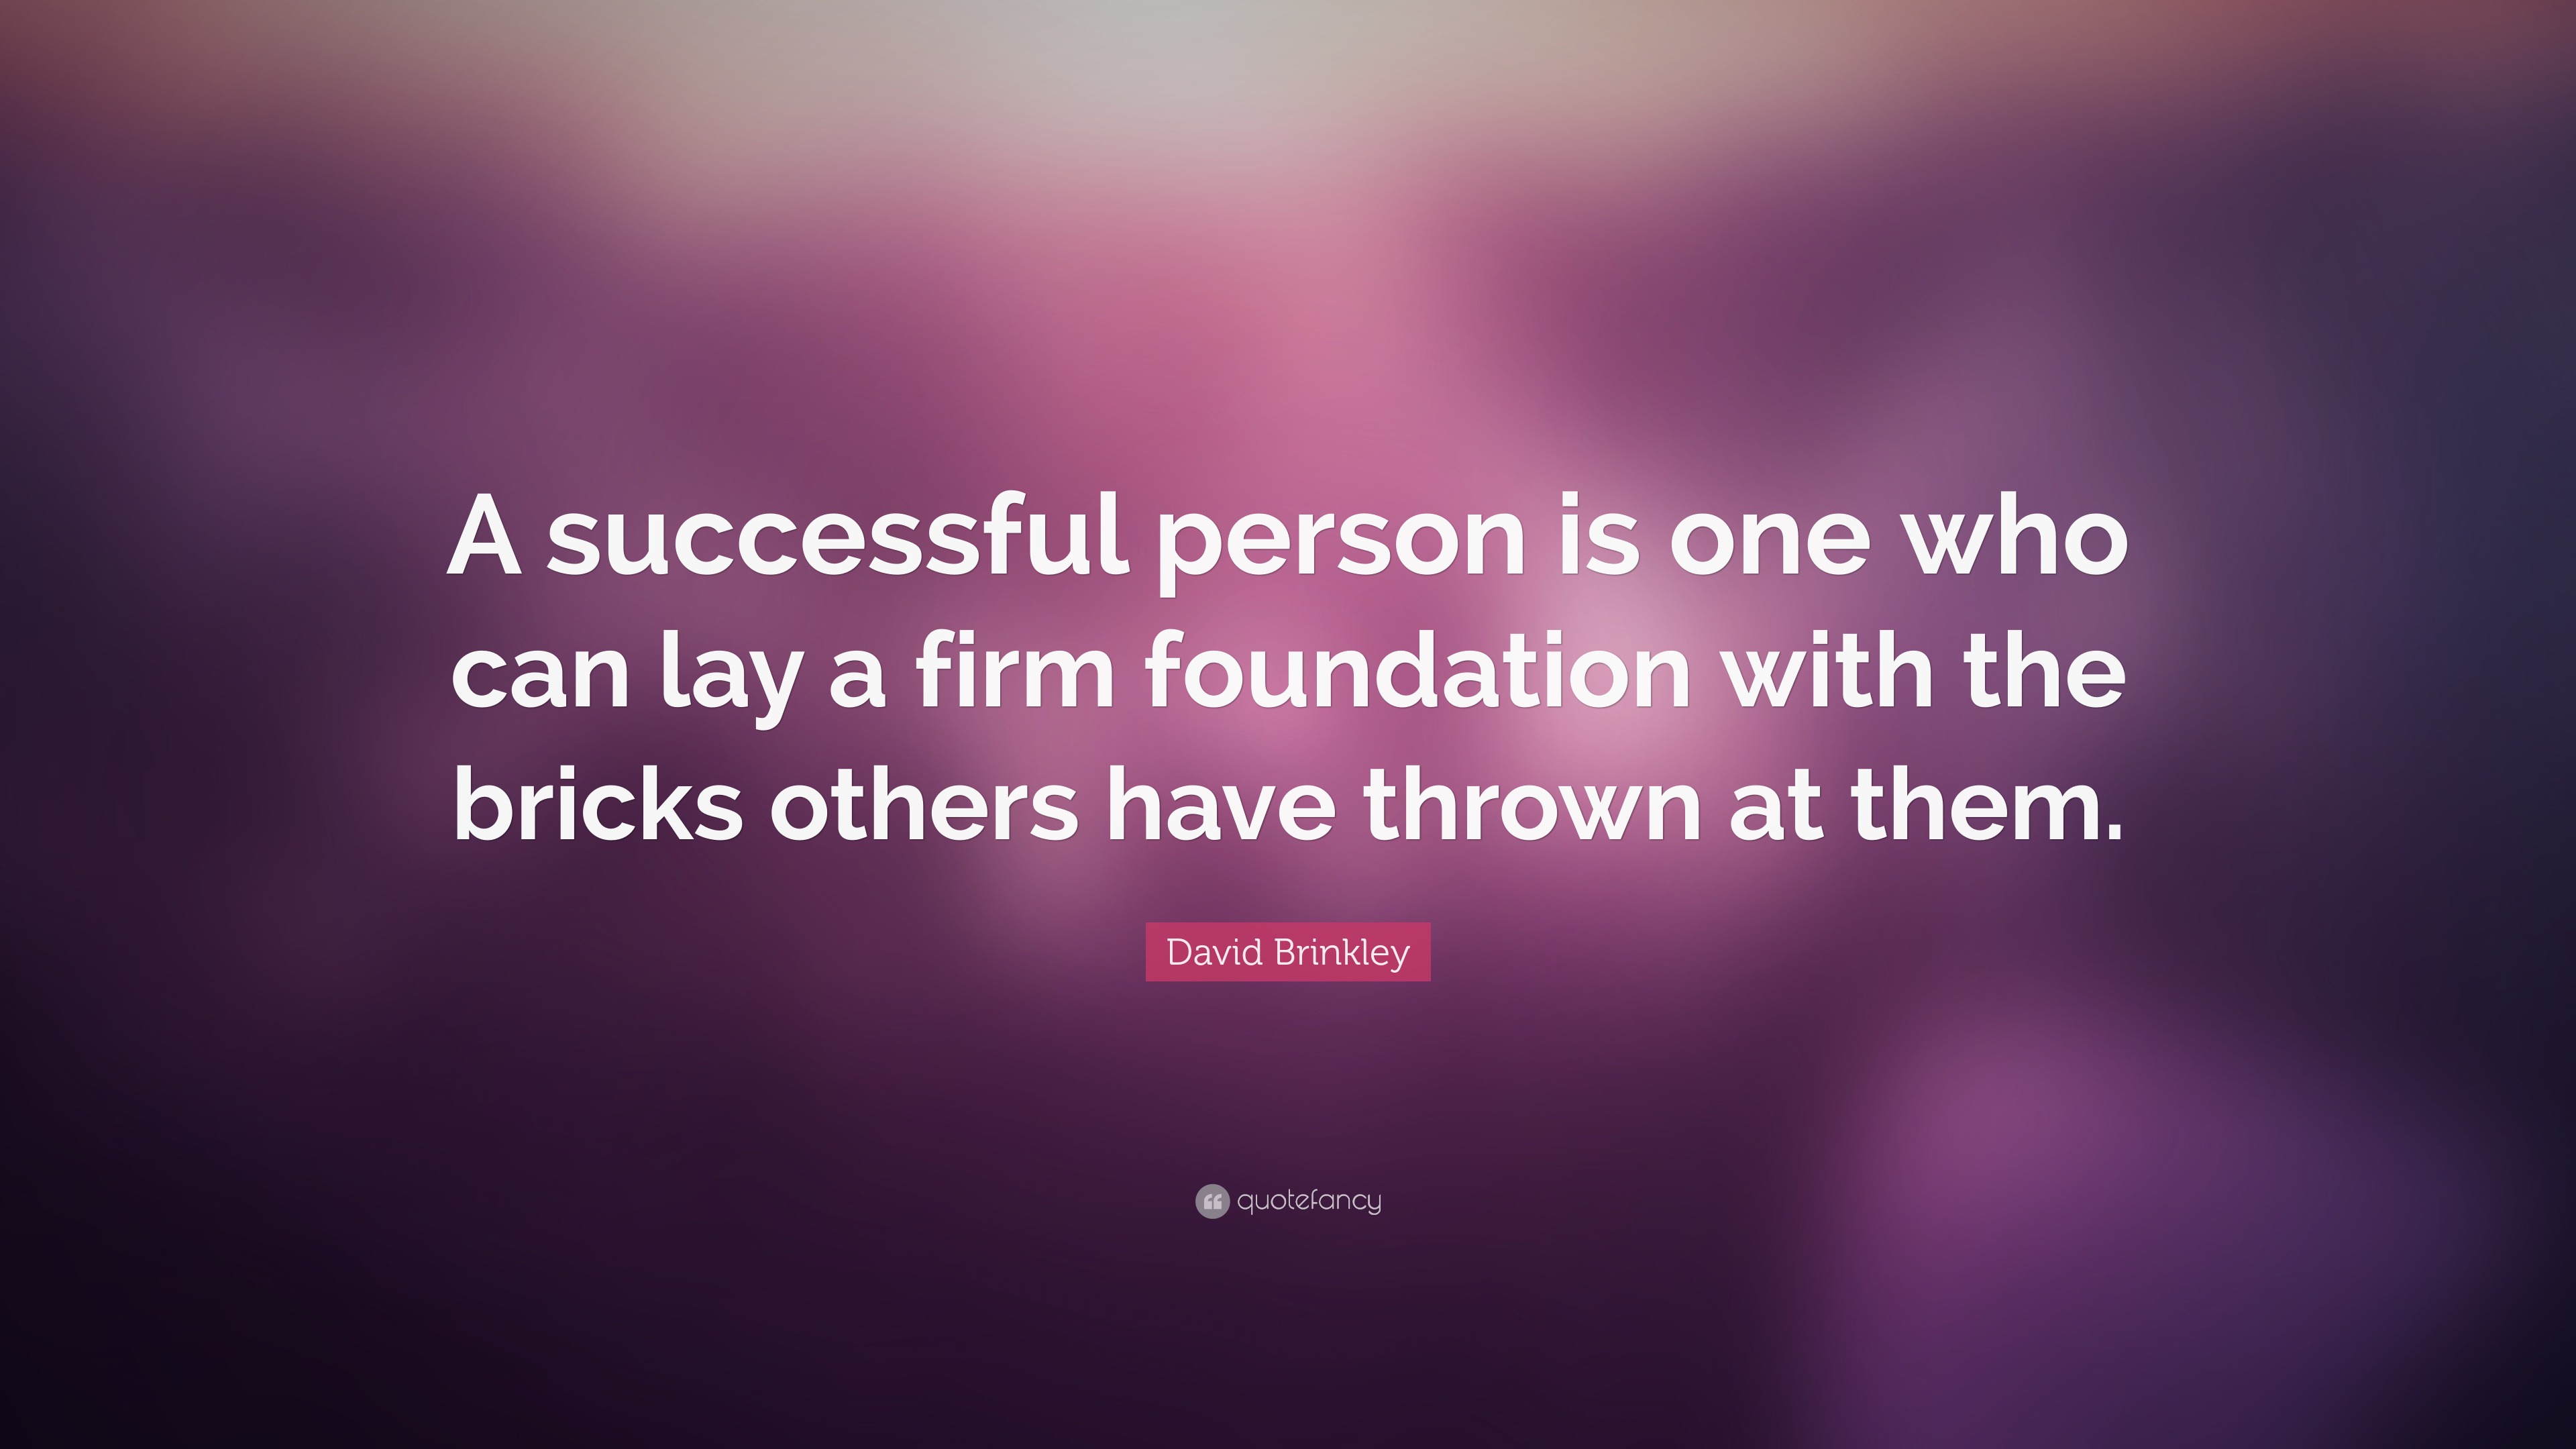 David Brinkley Quote: “A successful person is one who can lay a firm ...